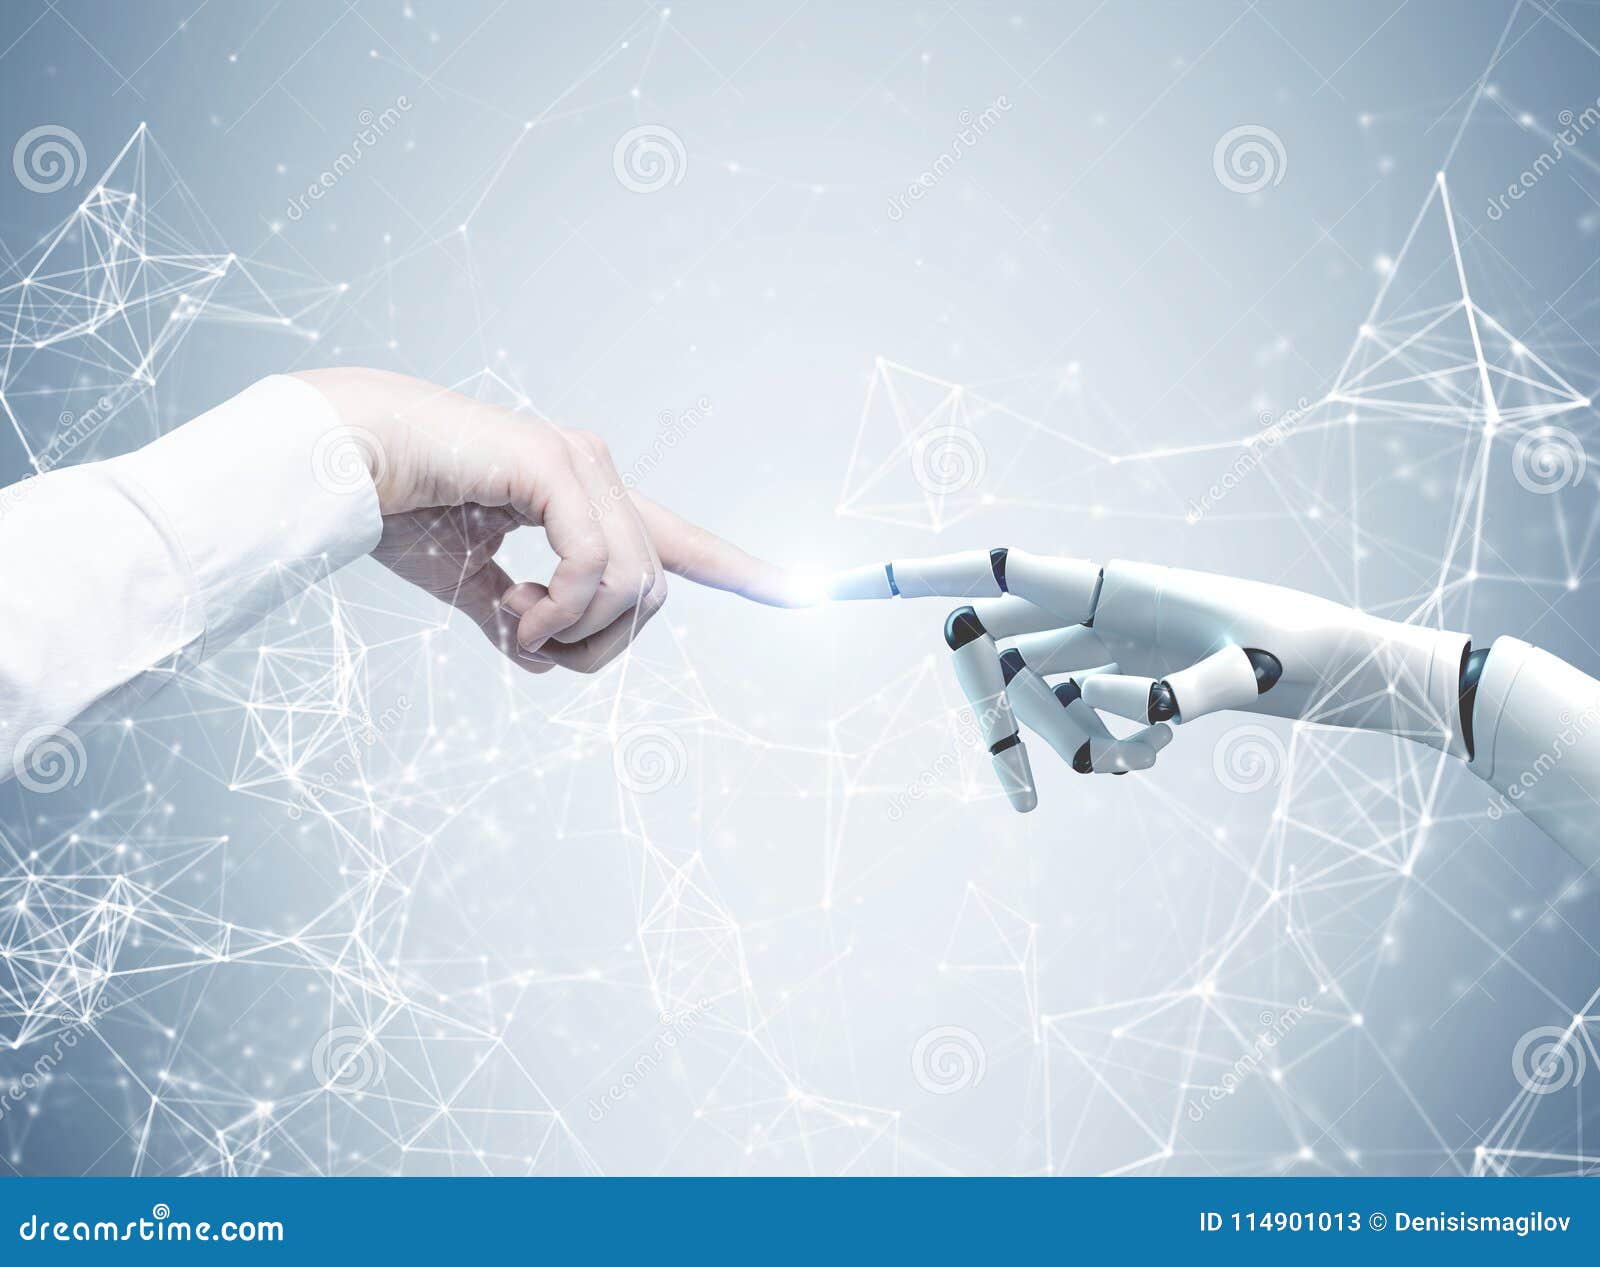 human and robot hands reaching out, network